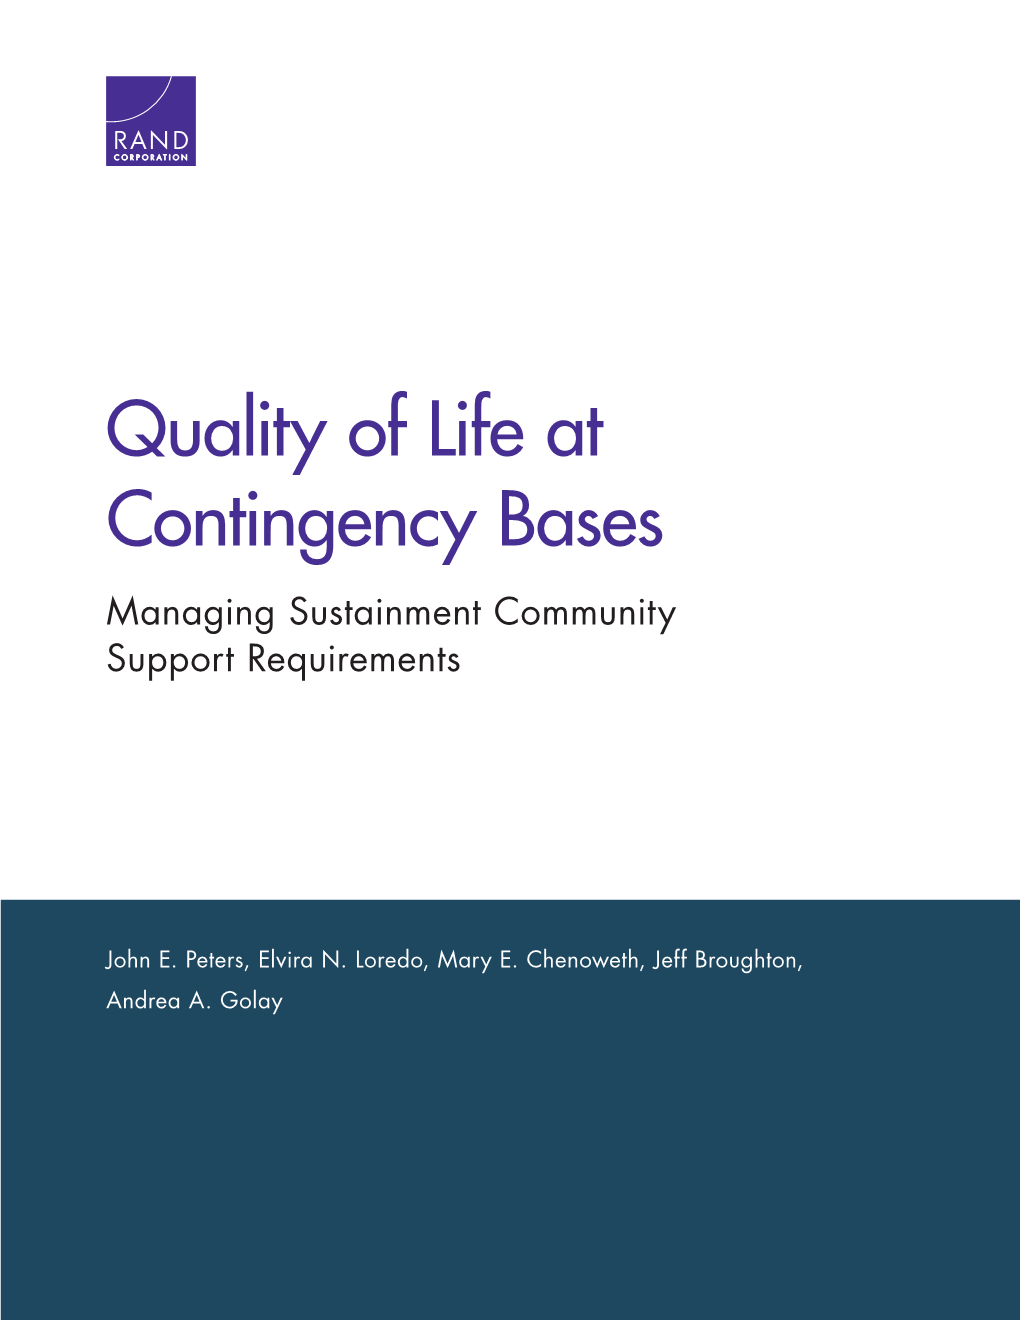 Quality of Life at Contingency Bases: Managing Sustainment Community Support Requirements